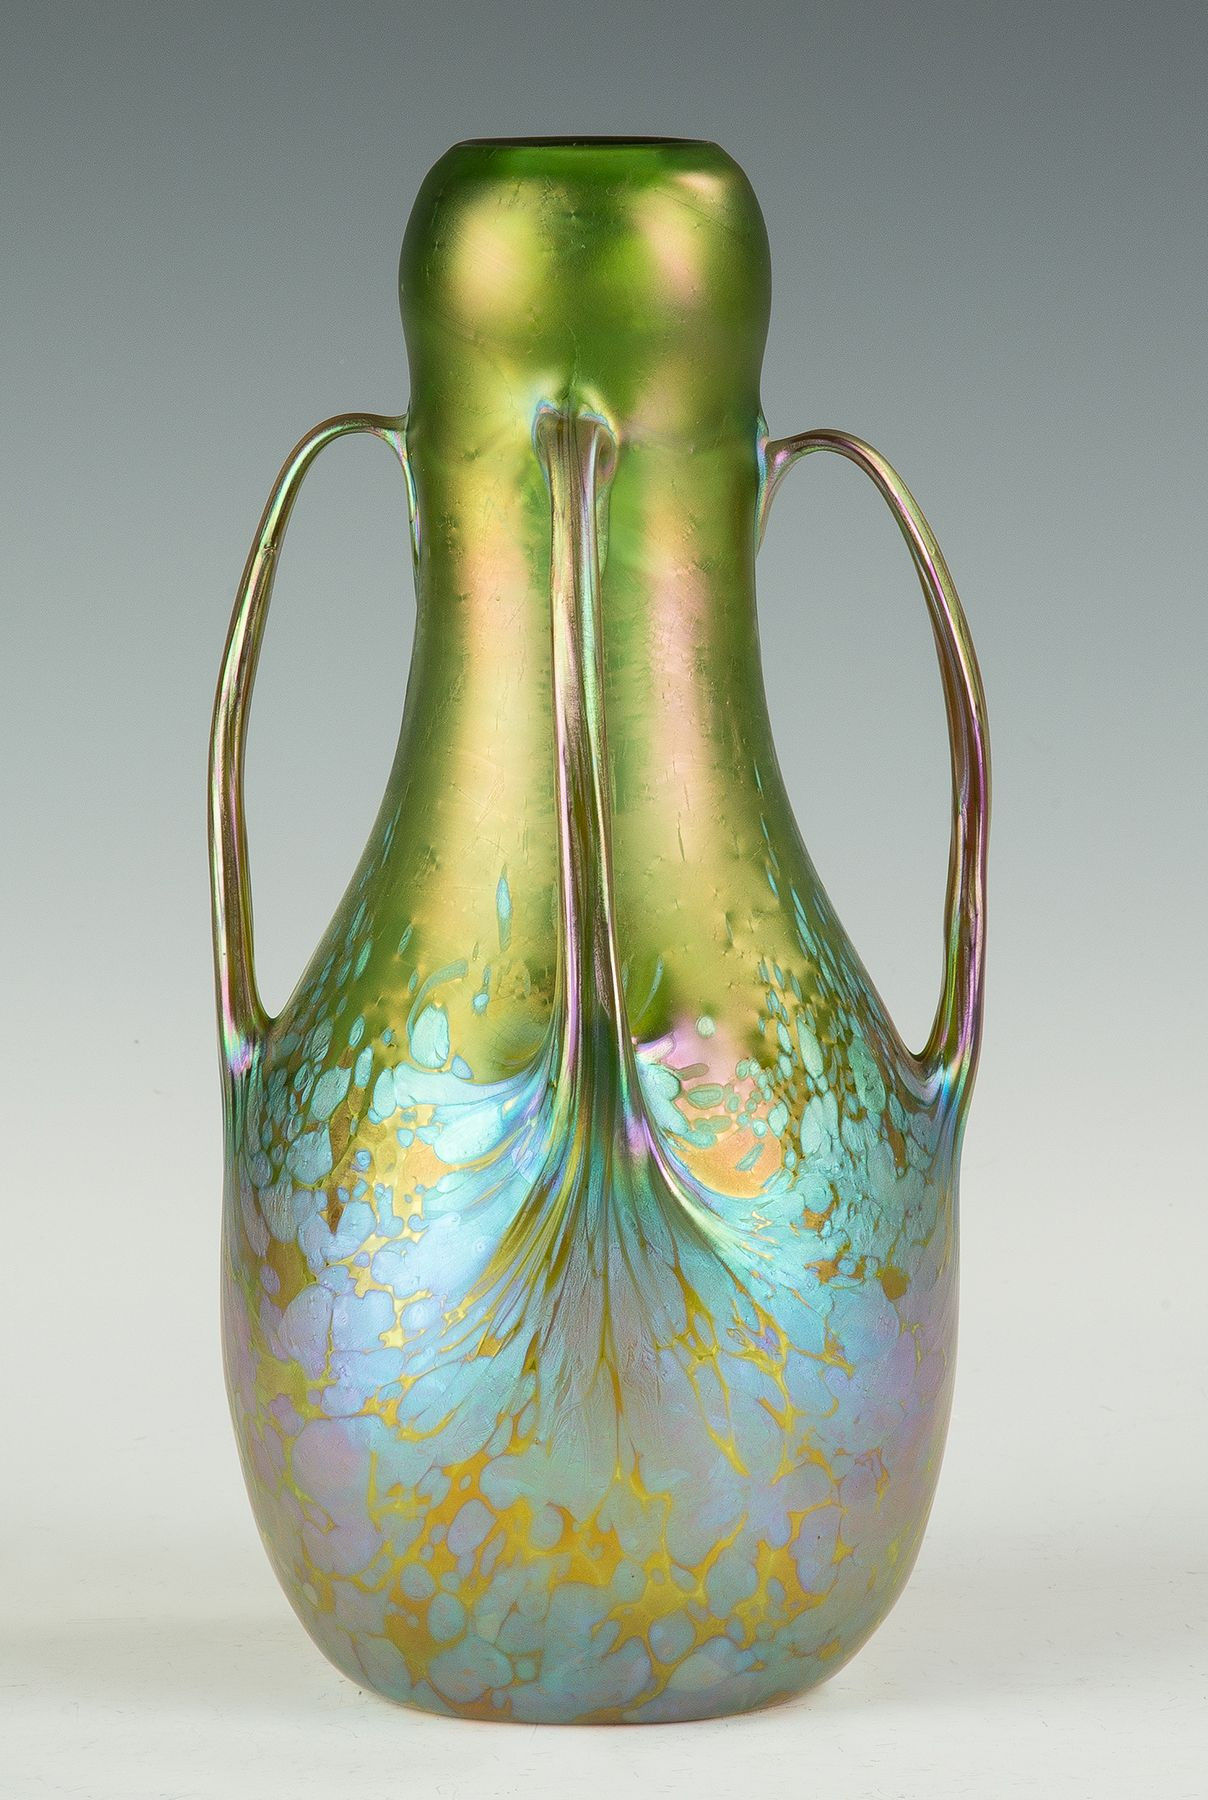 27 attractive Bohemia Crystal Vase Price 2024 free download bohemia crystal vase price of a fine loetz oil spot handled vase cottone auctions glass art intended for a fine loetz oil spot handled vase cottone auctions